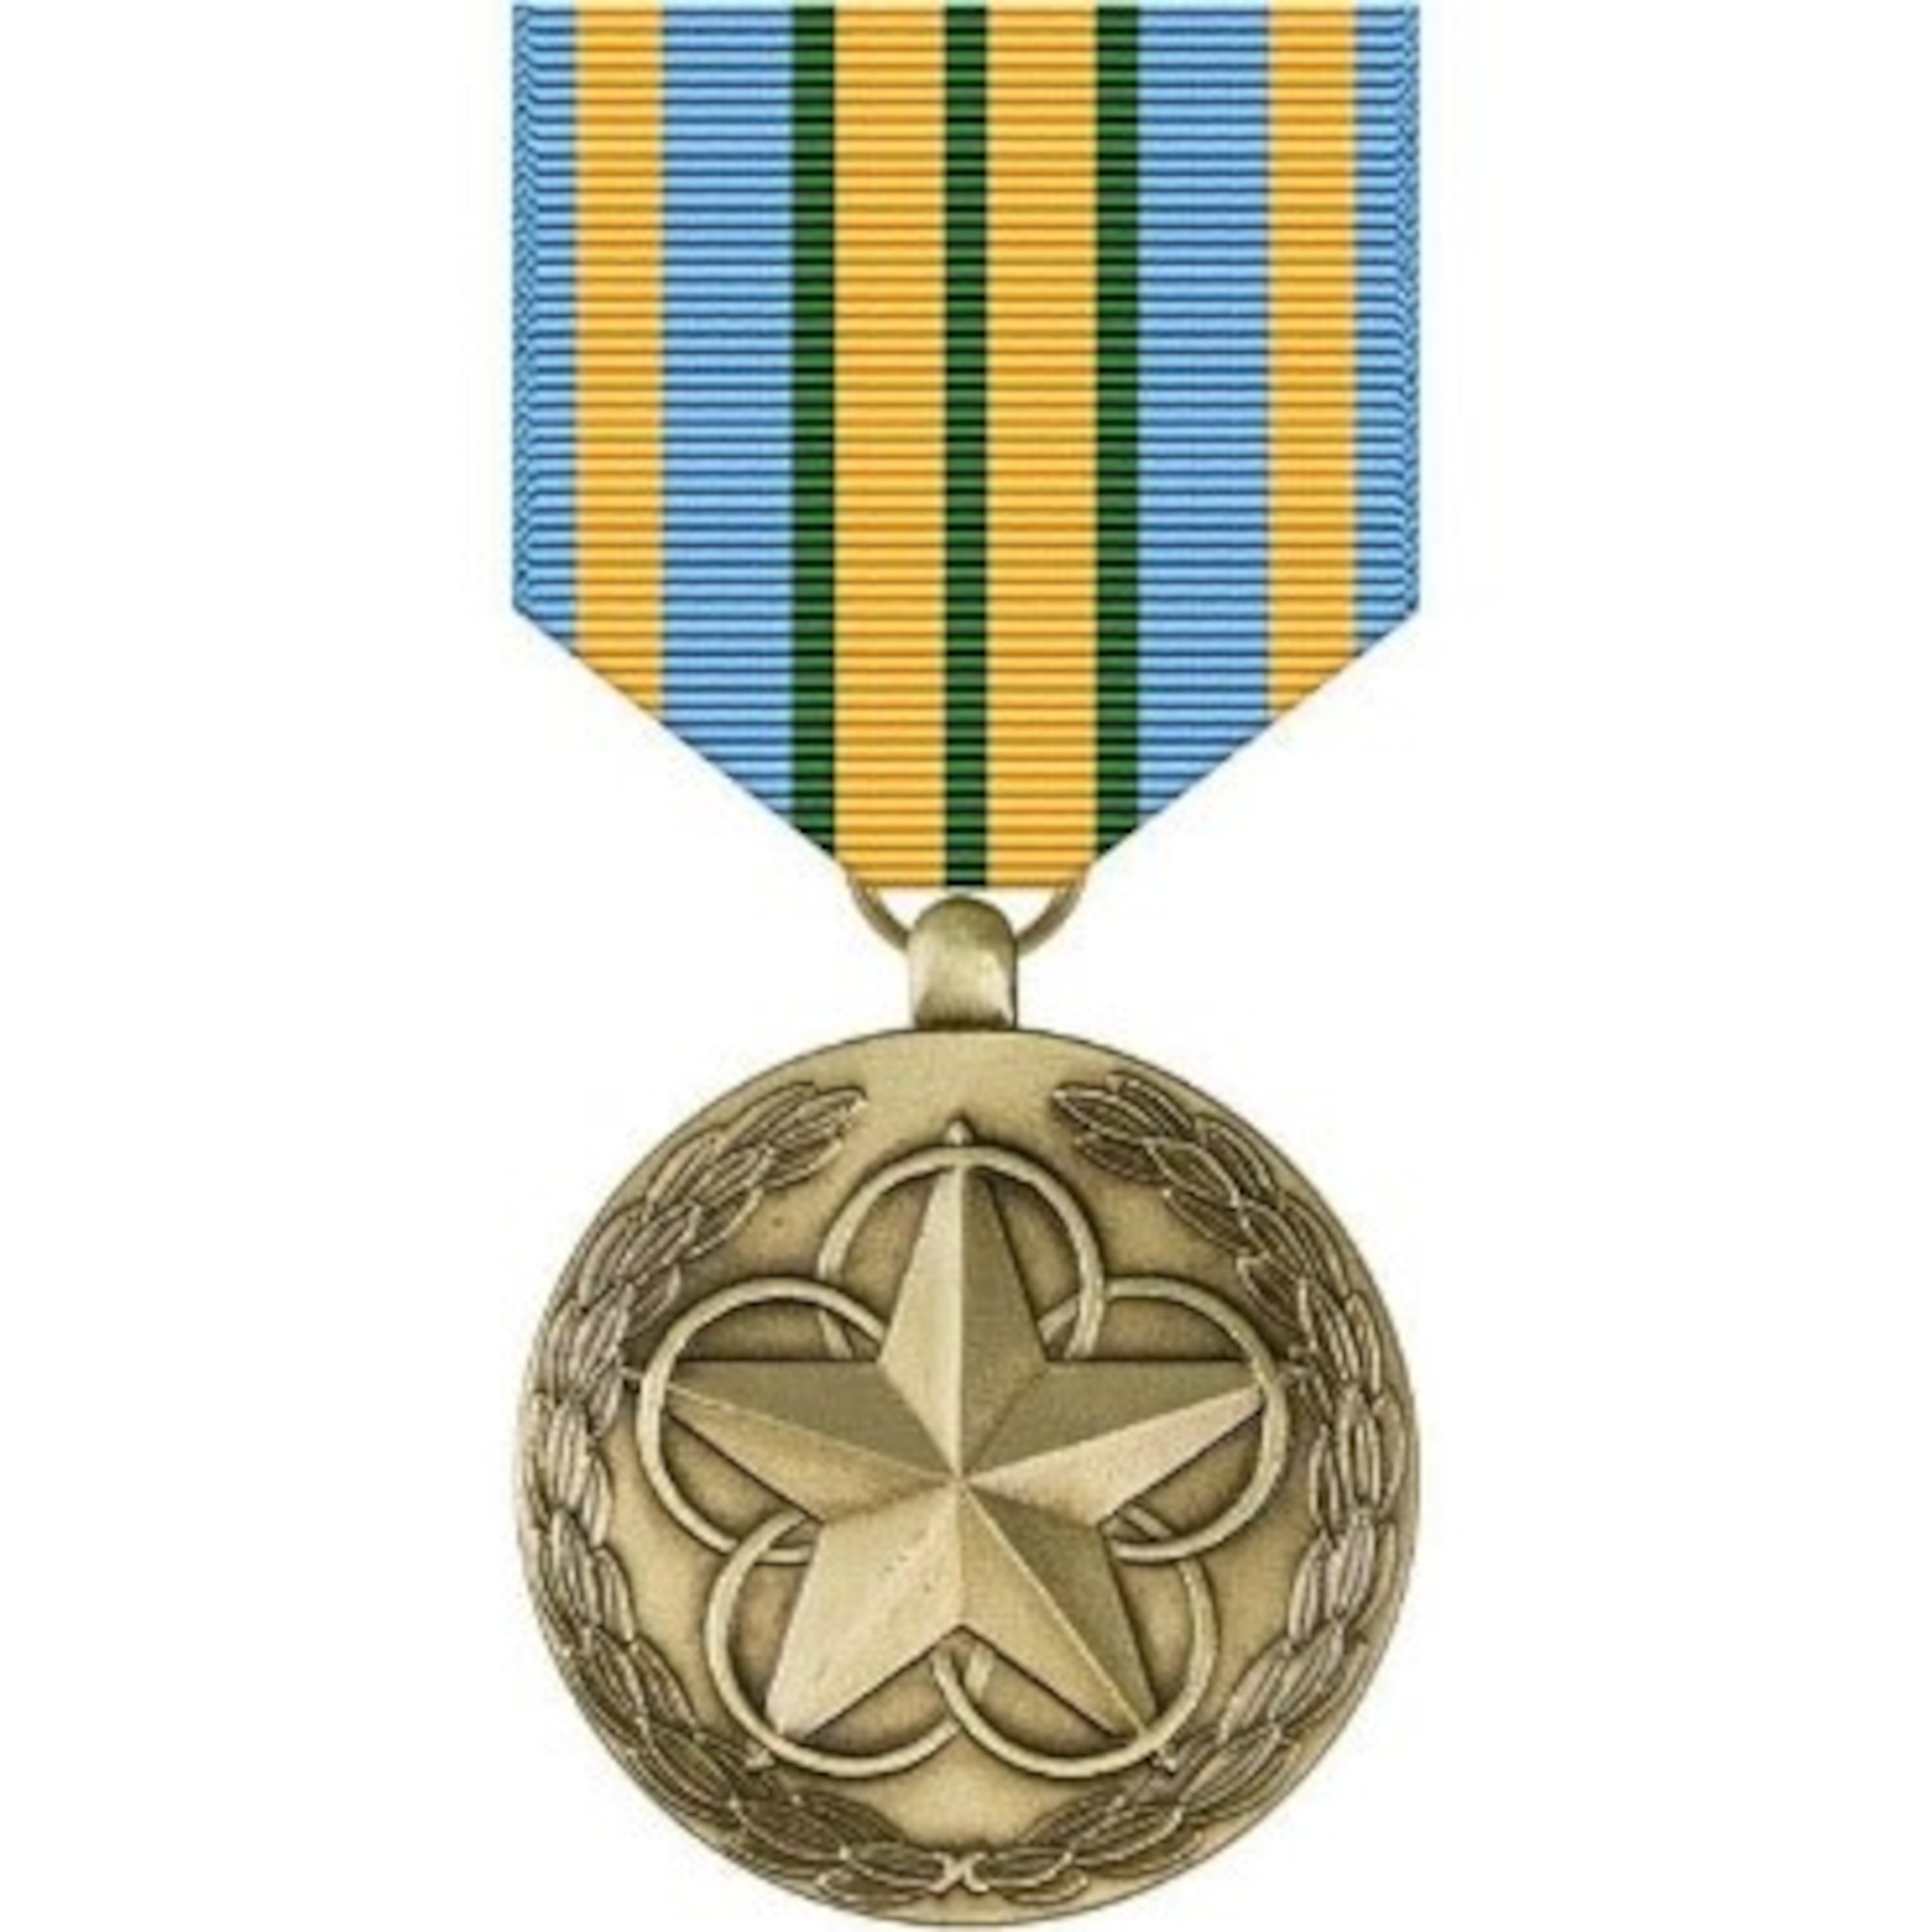 The Military Outstanding Volunteer Service Medal (MOVSM) was created under Executive Order 12830 by George H. W. Bush on Jan. 9, 1993. The medal was designed by the Institute of Heraldry and was first issued in December, 1993. Among Federal service medals, the MOVSM precedence ranks just below the Humanitarian Service Medal and just above the Armed Forces Reserve Medal. (DoD graphic)